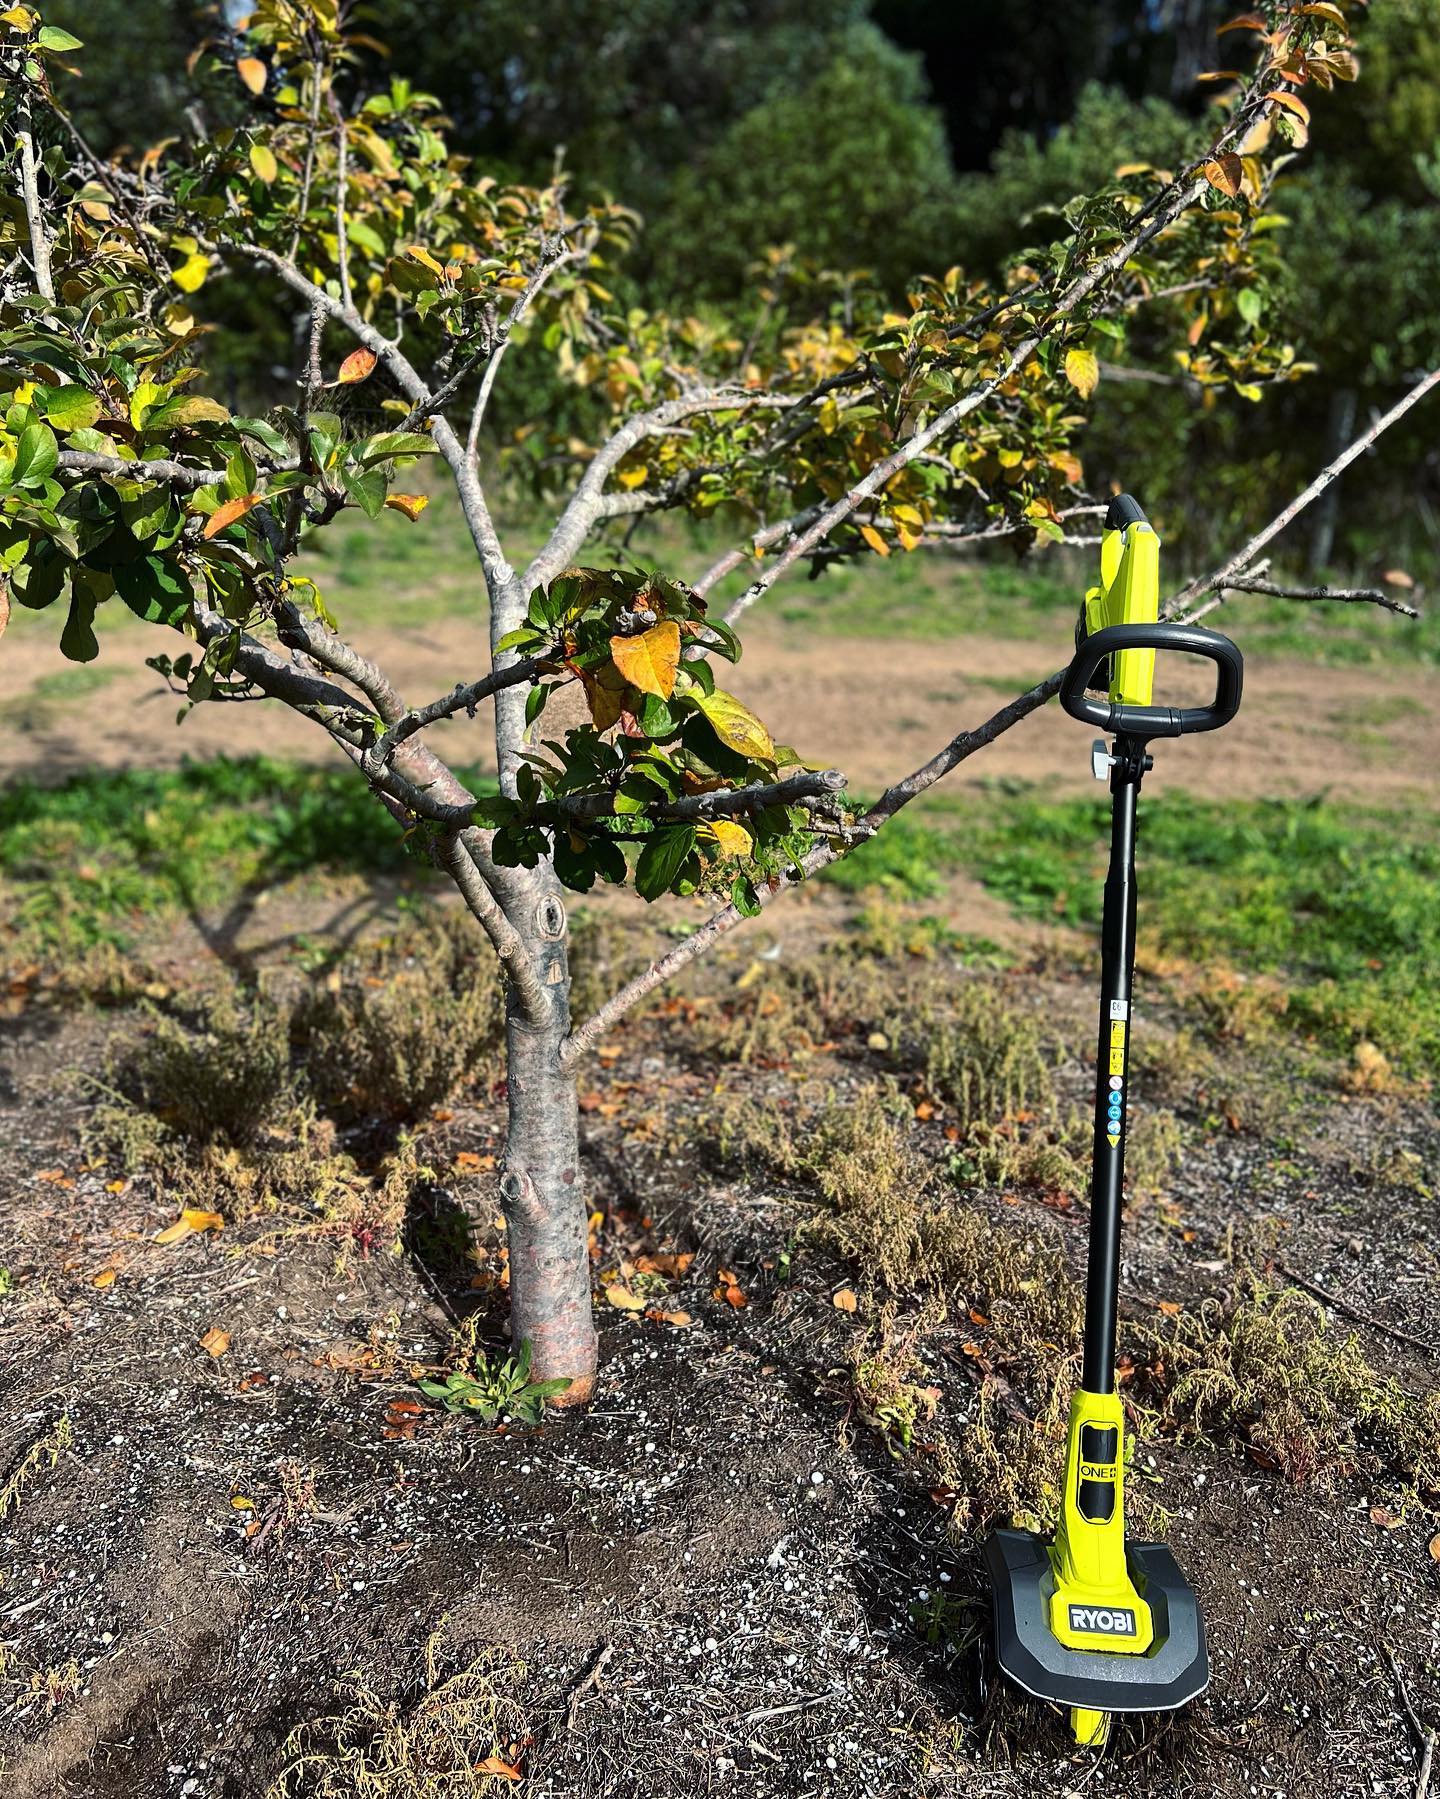 My new best friend in the garden 🍂 before, during and after, bulbs are in around some fruit trees and was super easy with this nifty little ryobiau cultivator 🍂